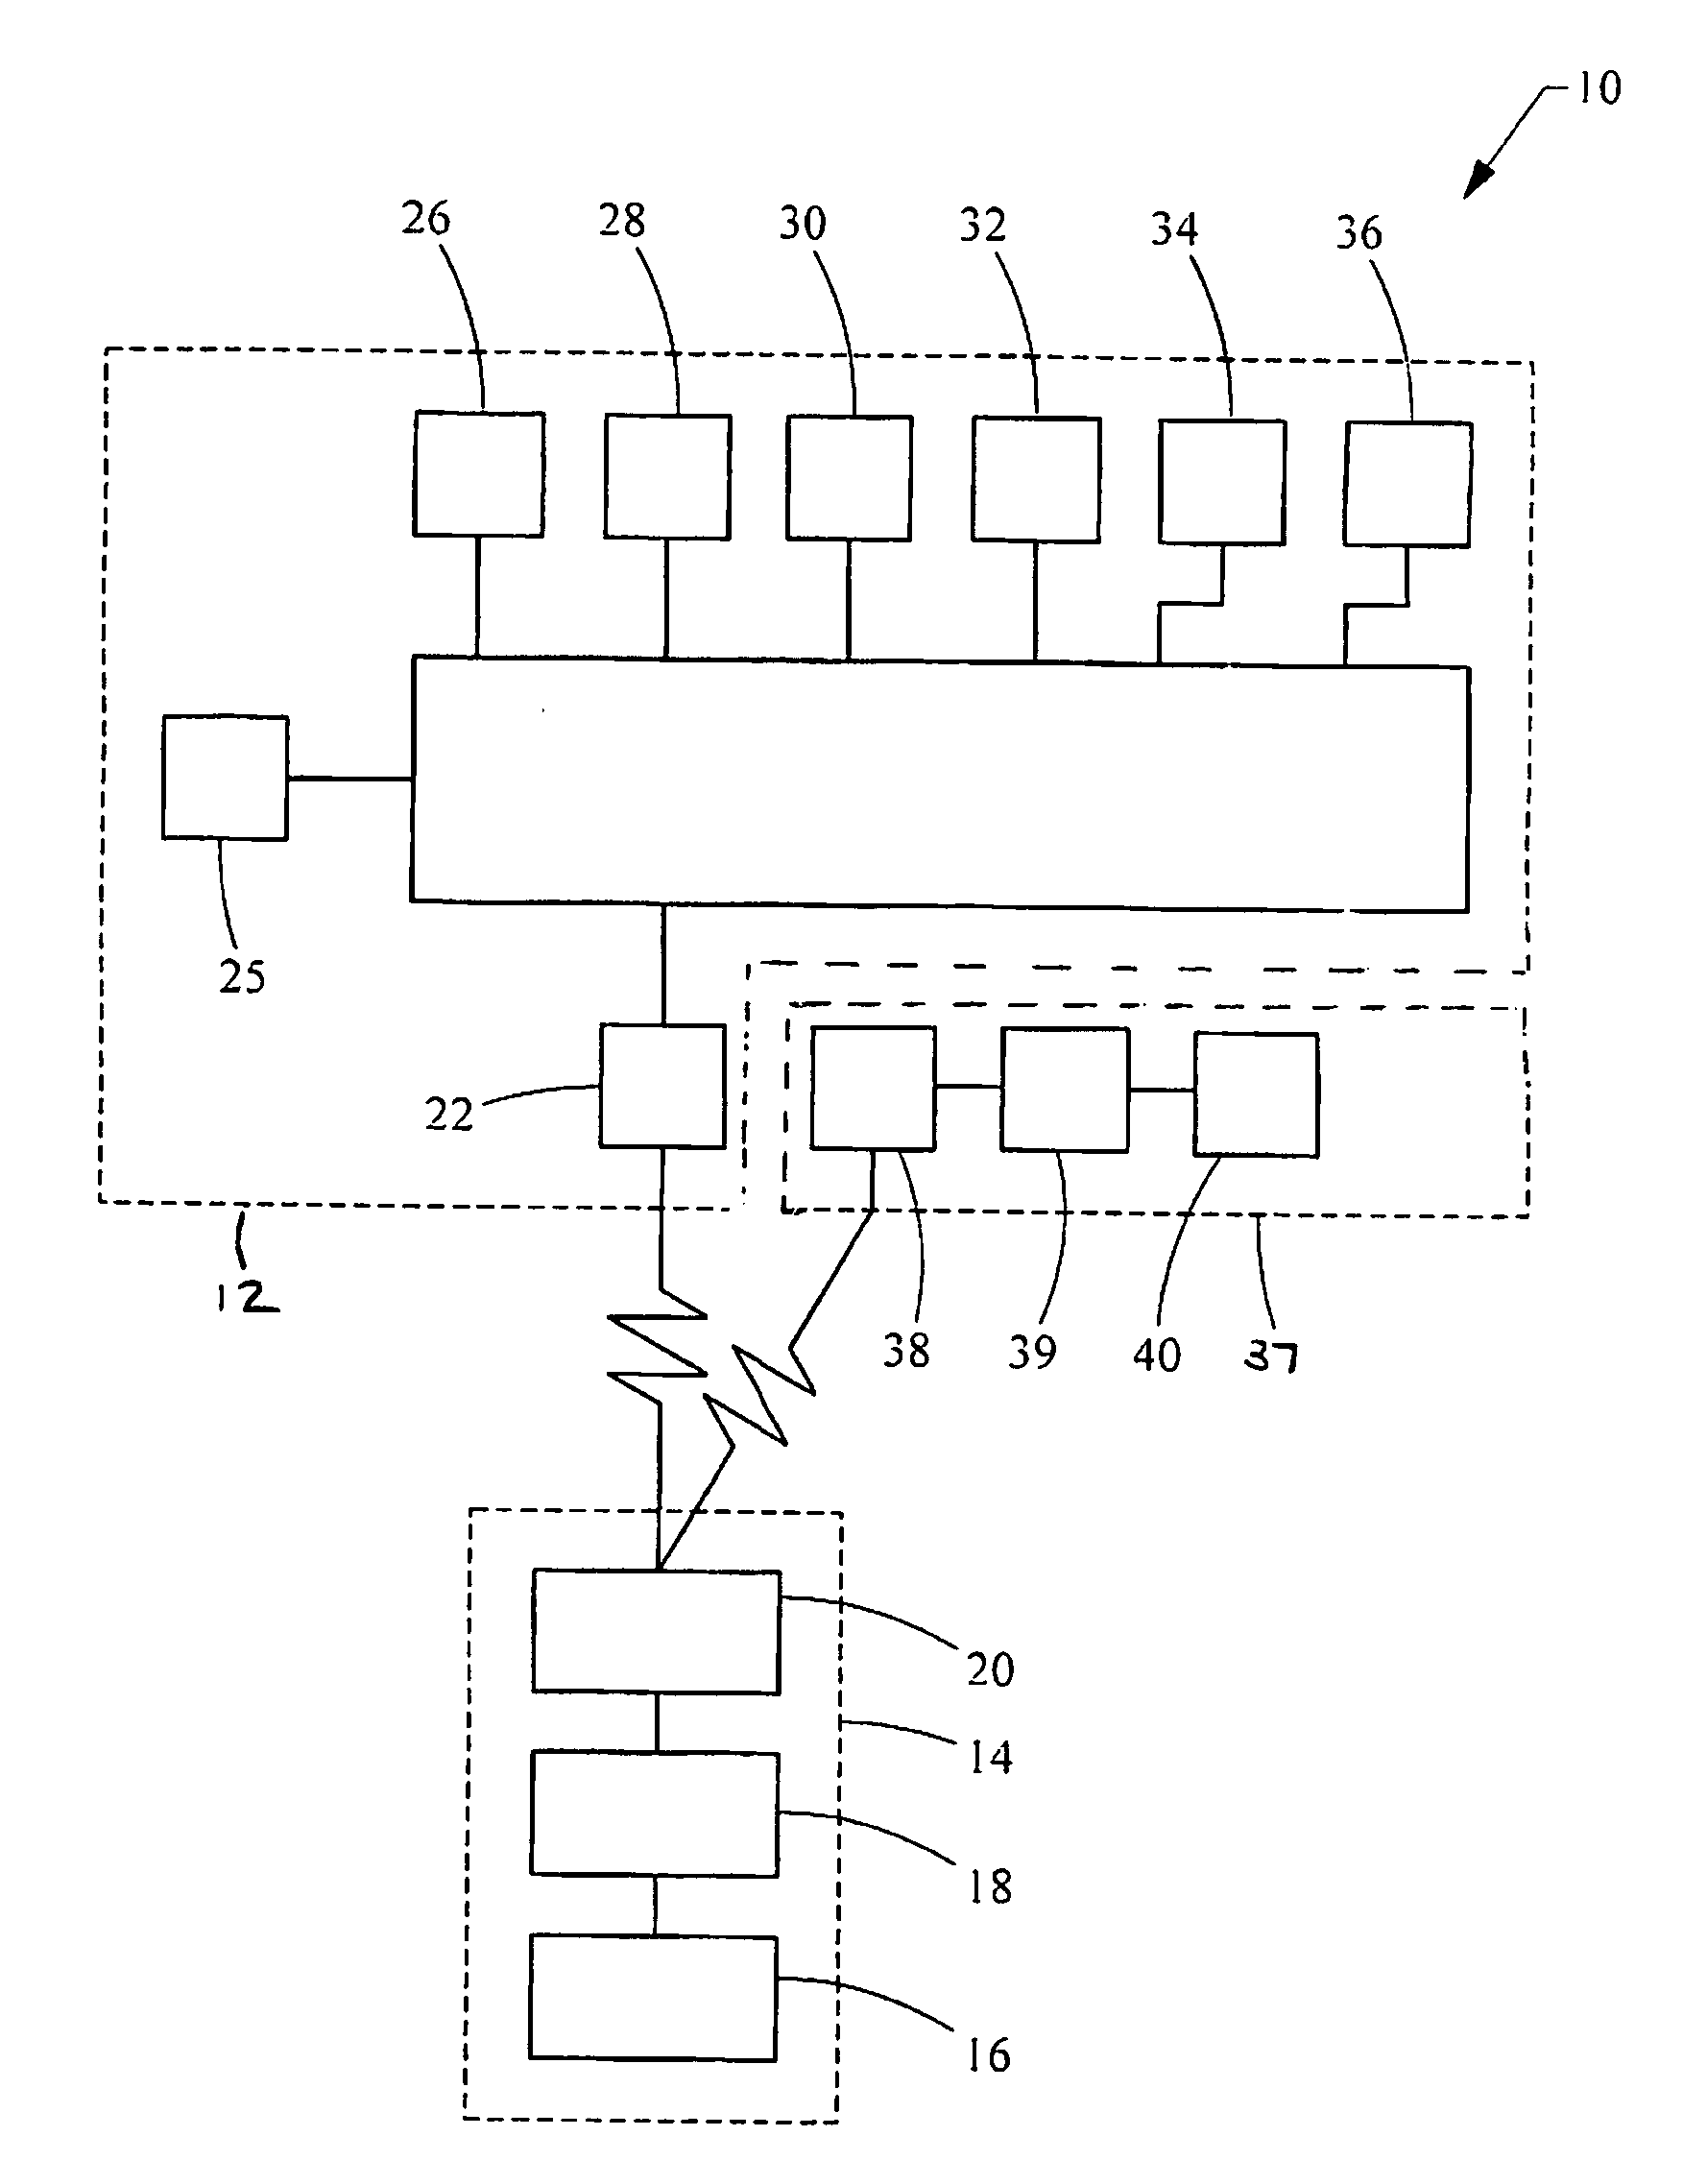 Display replication and control of a portable device via a wireless interface in an automobile